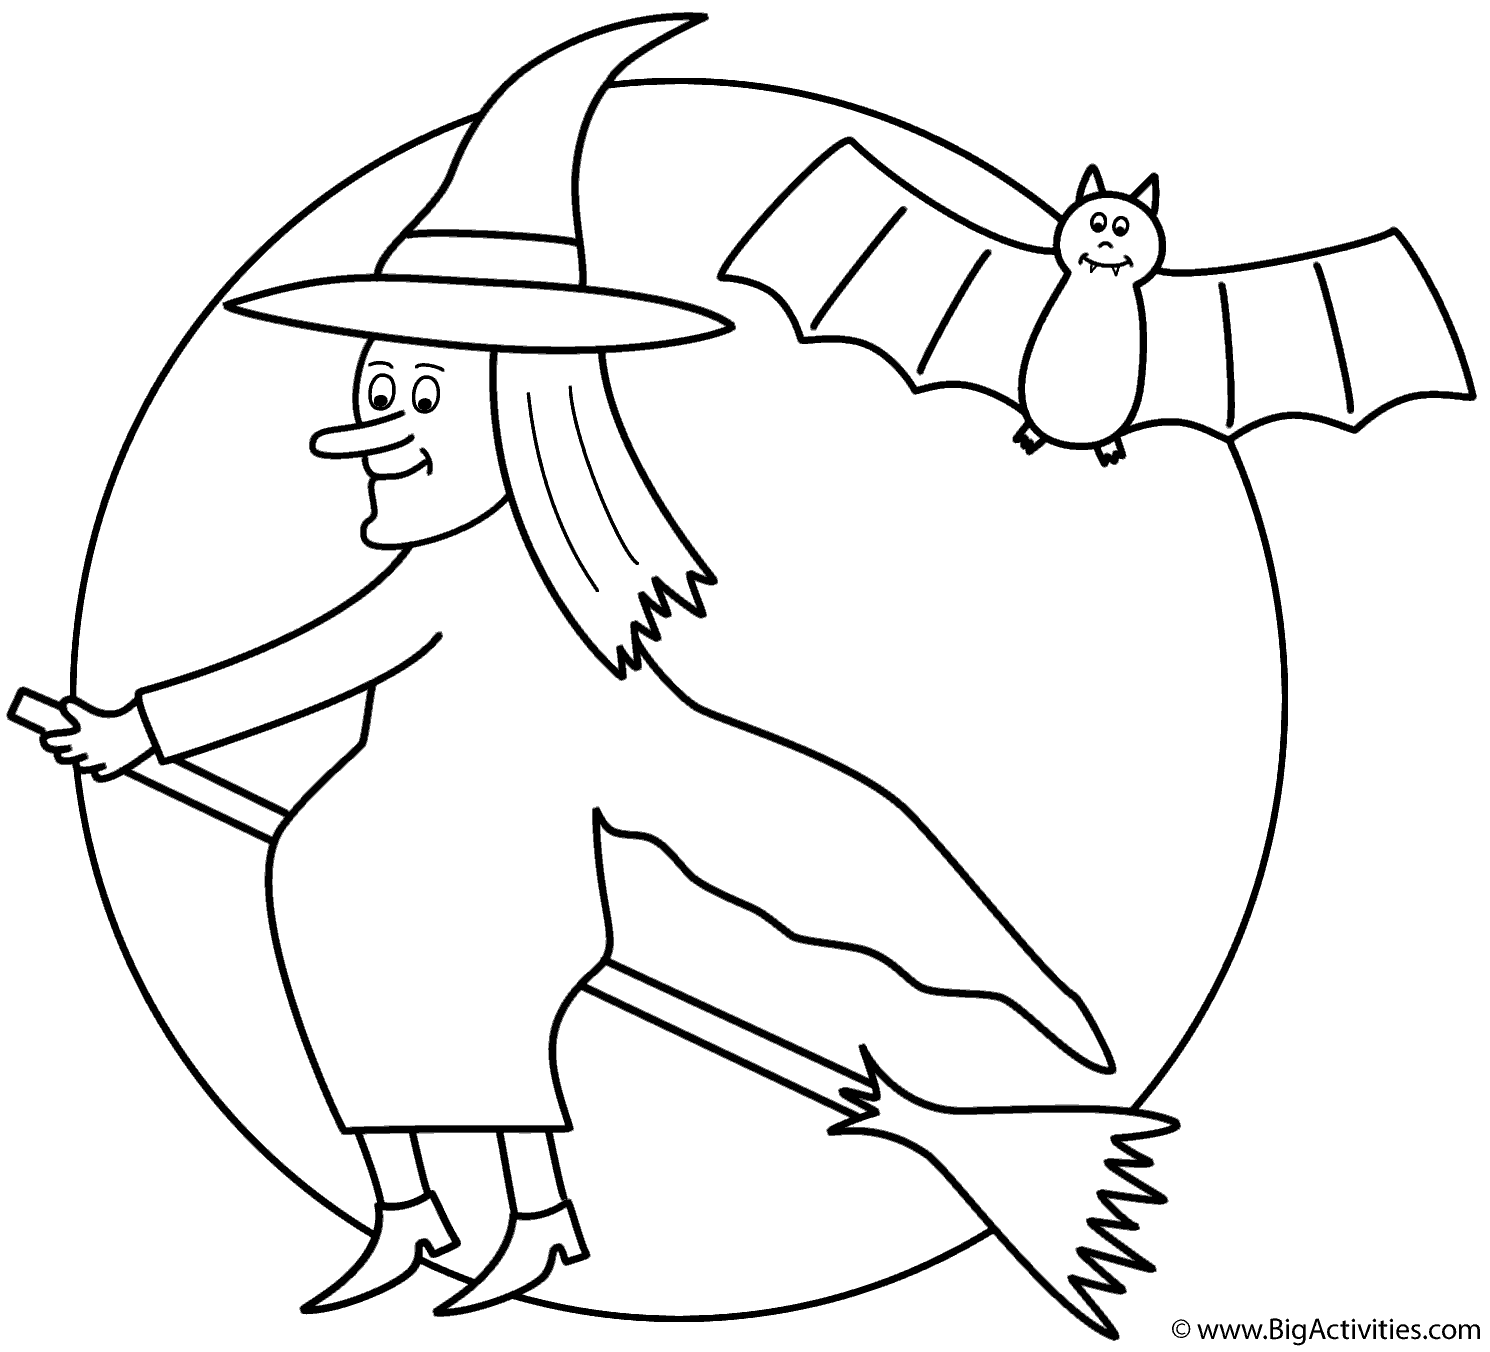 Download Witch on broom with the moon and bat - Coloring Page (Halloween)